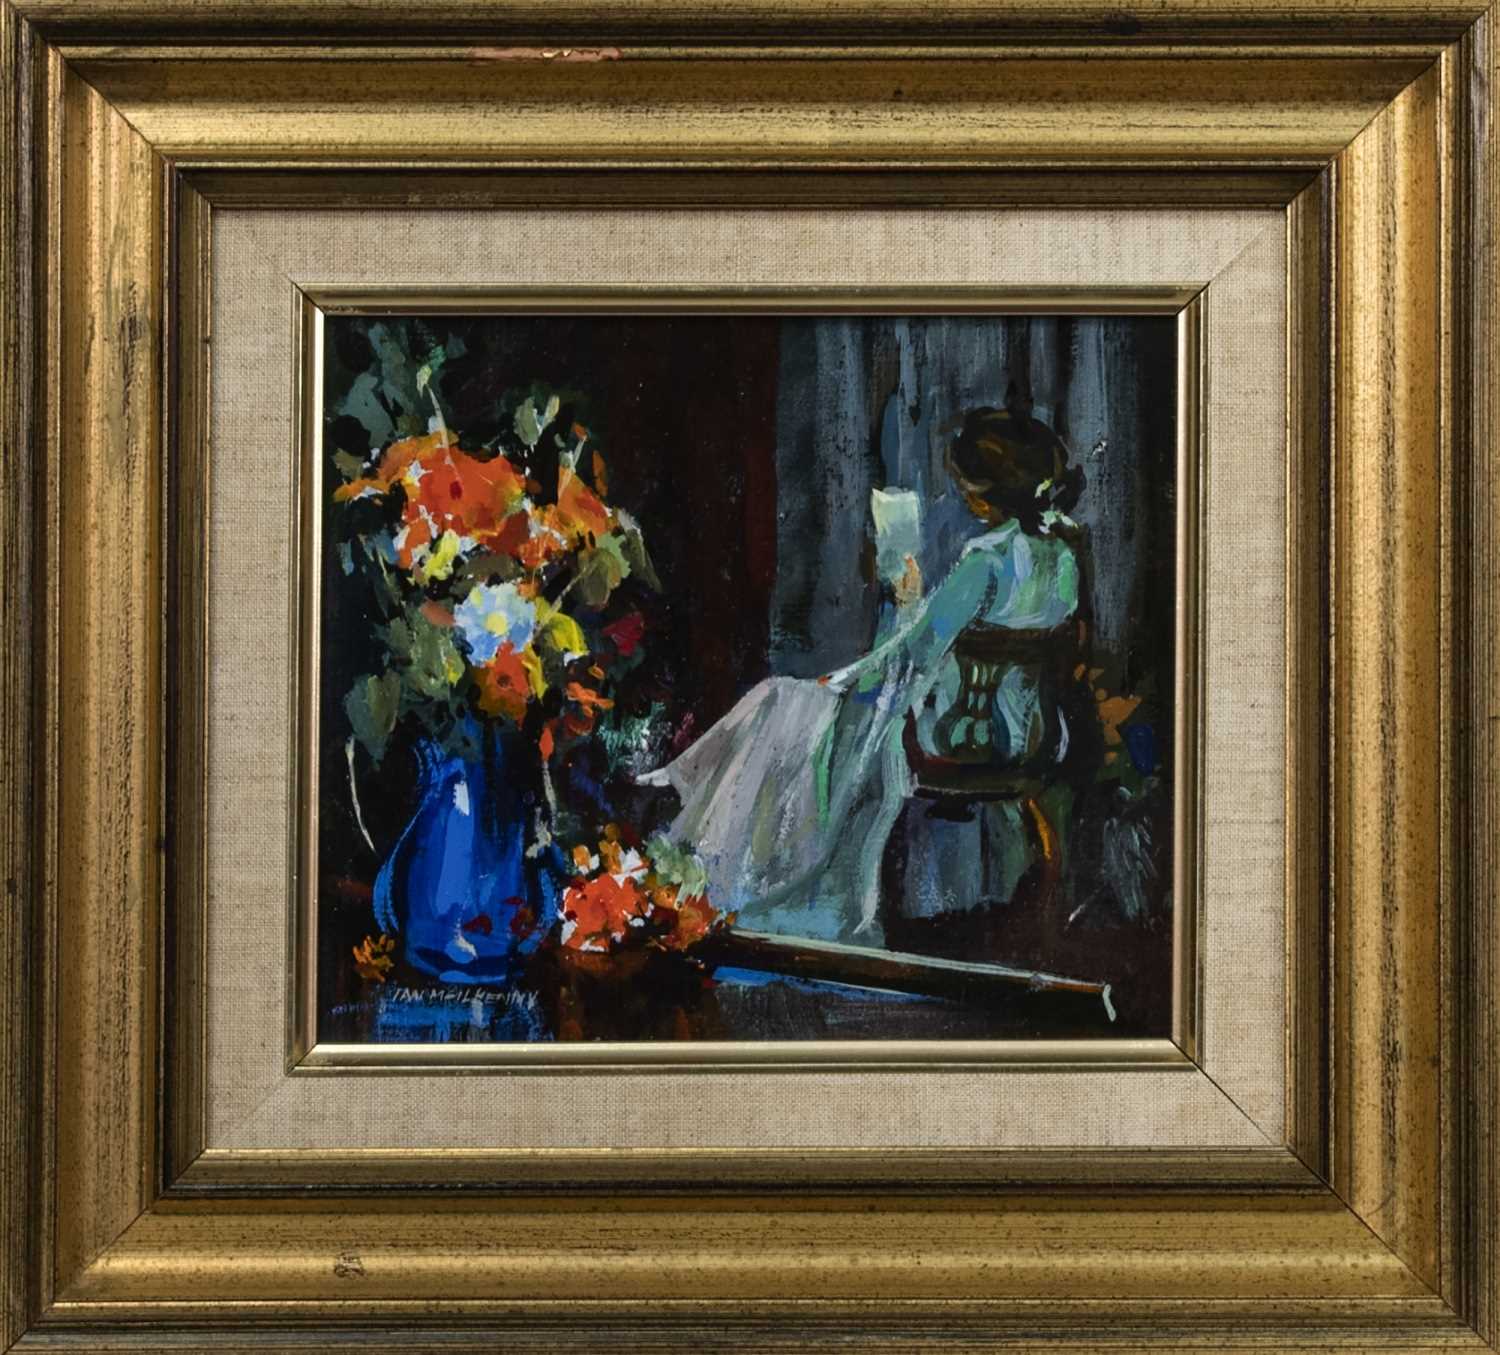 Lot 416 - STILL LIFE WITH WOMAN, AN OIL BY IAN MCILHENNY